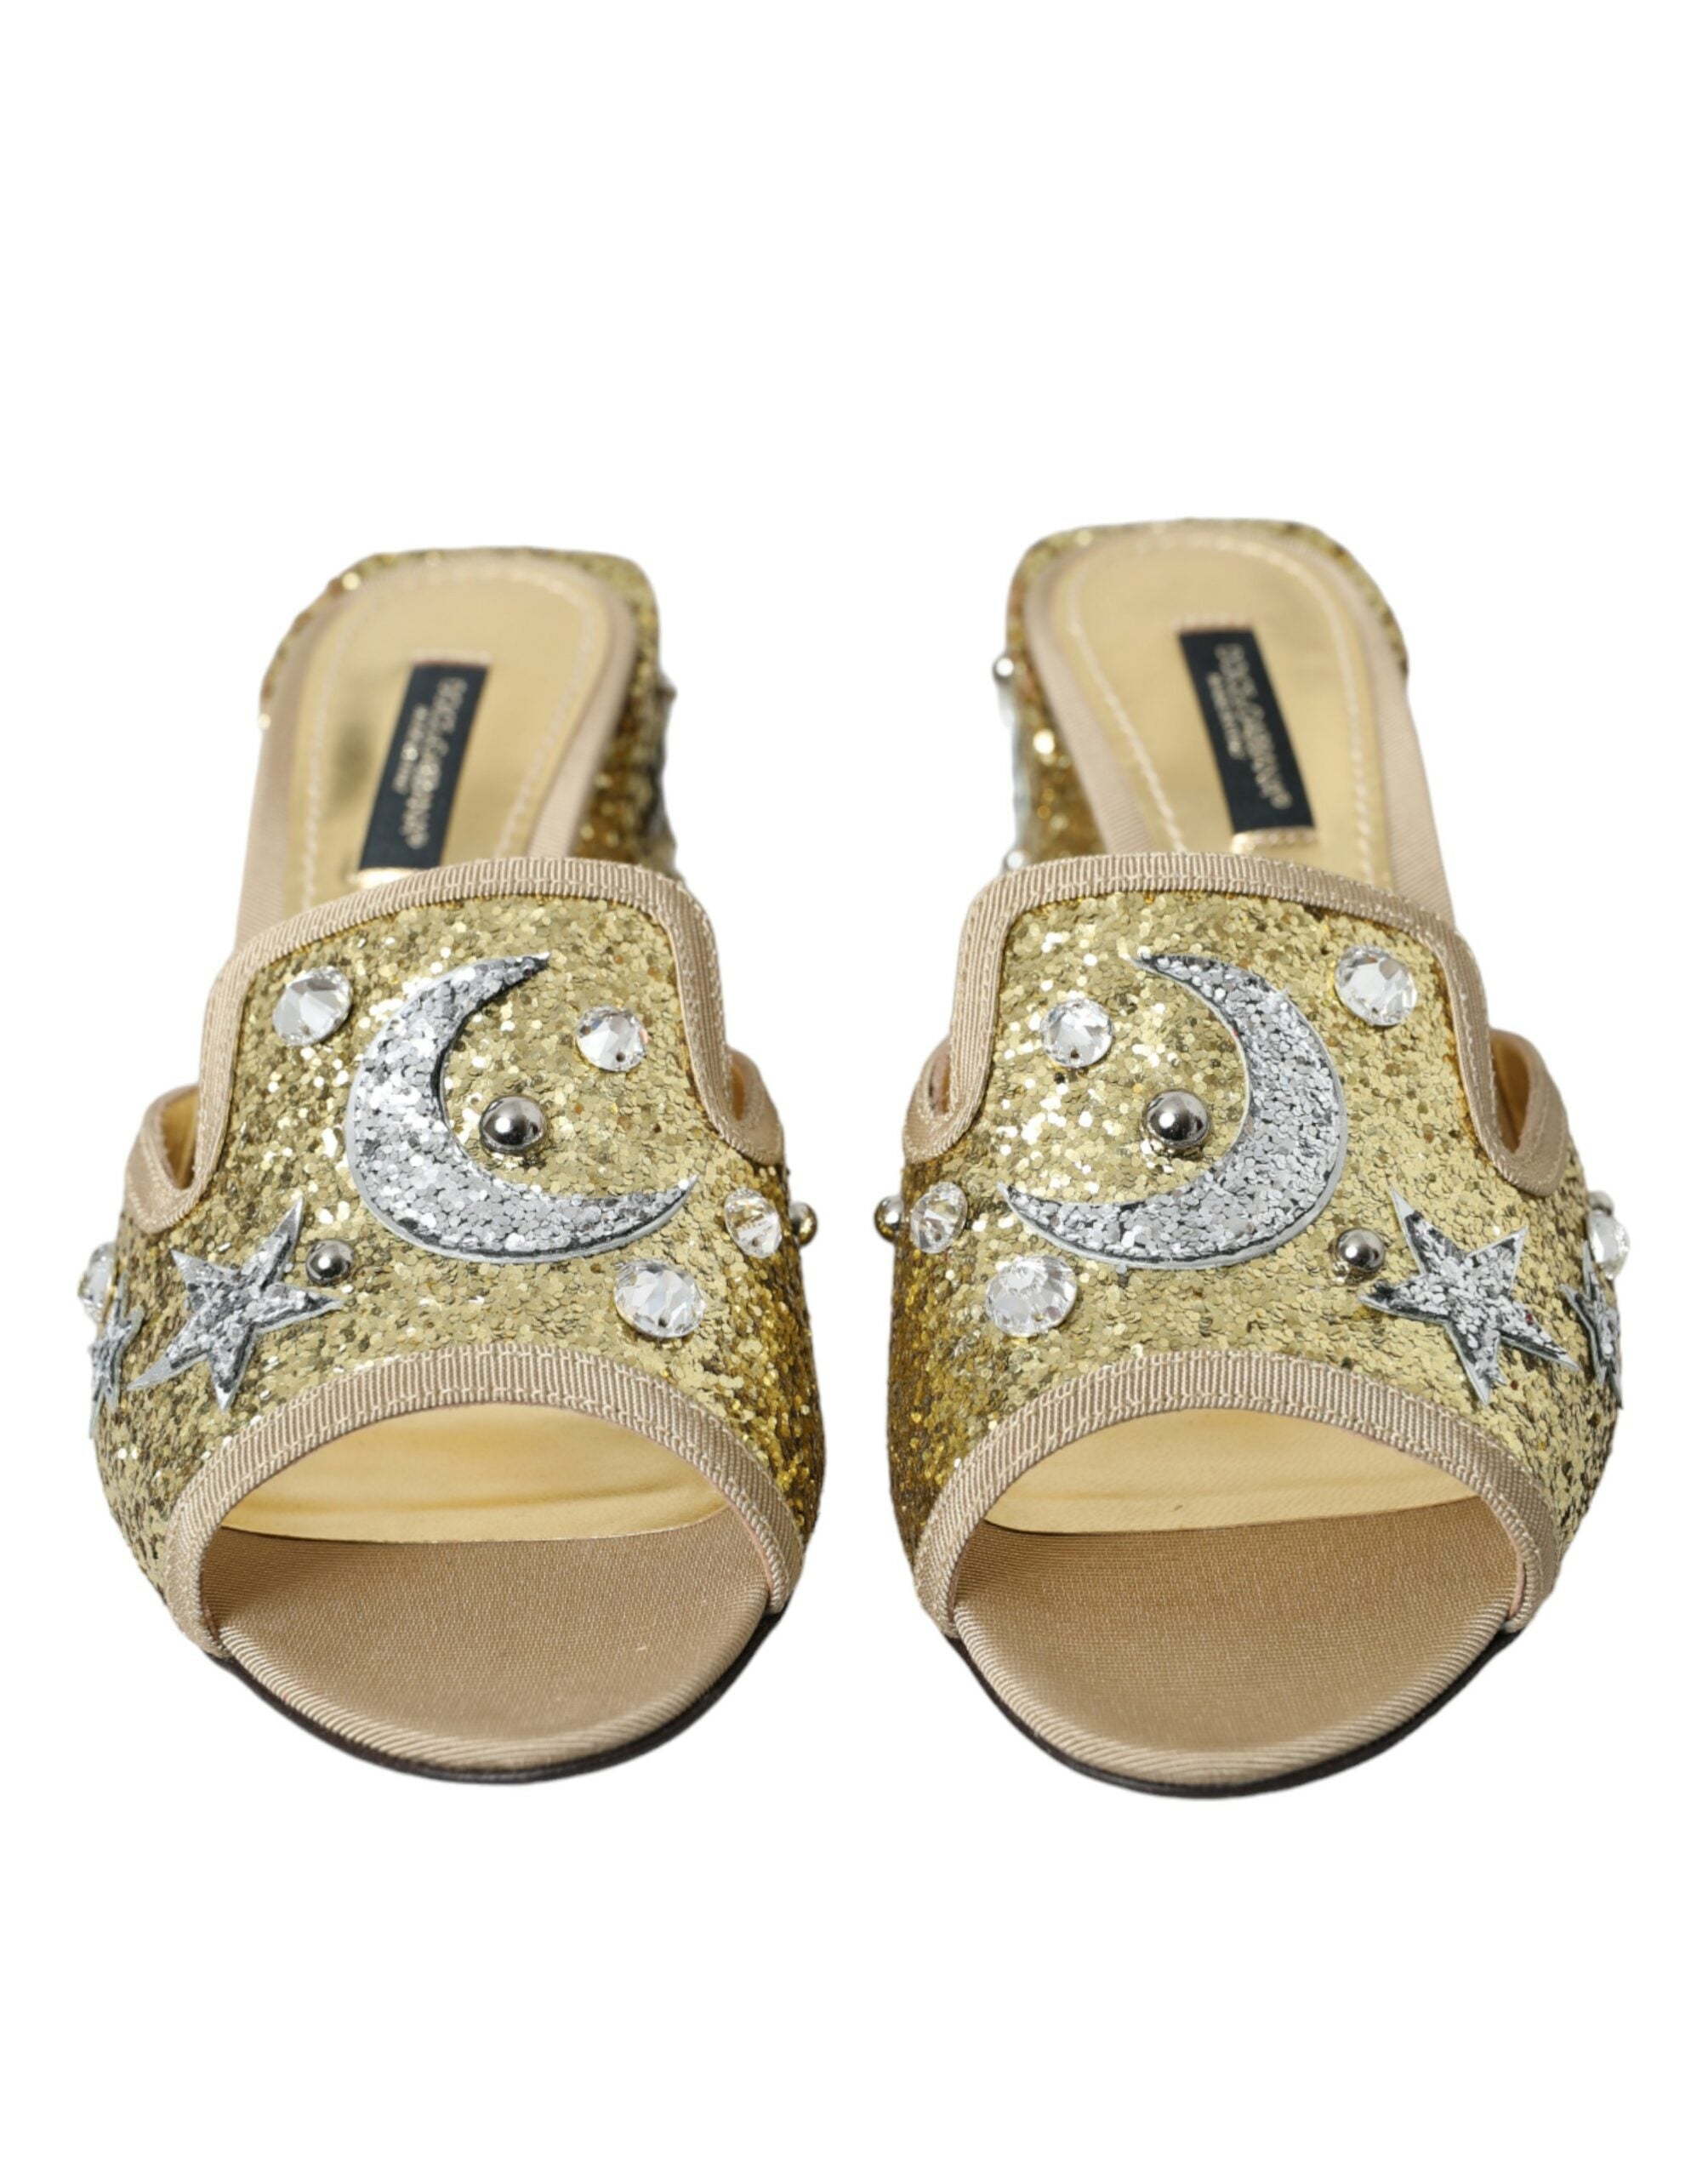 Gold Sequin Leather Heels Sandals Shoes - Divitiae Glamour